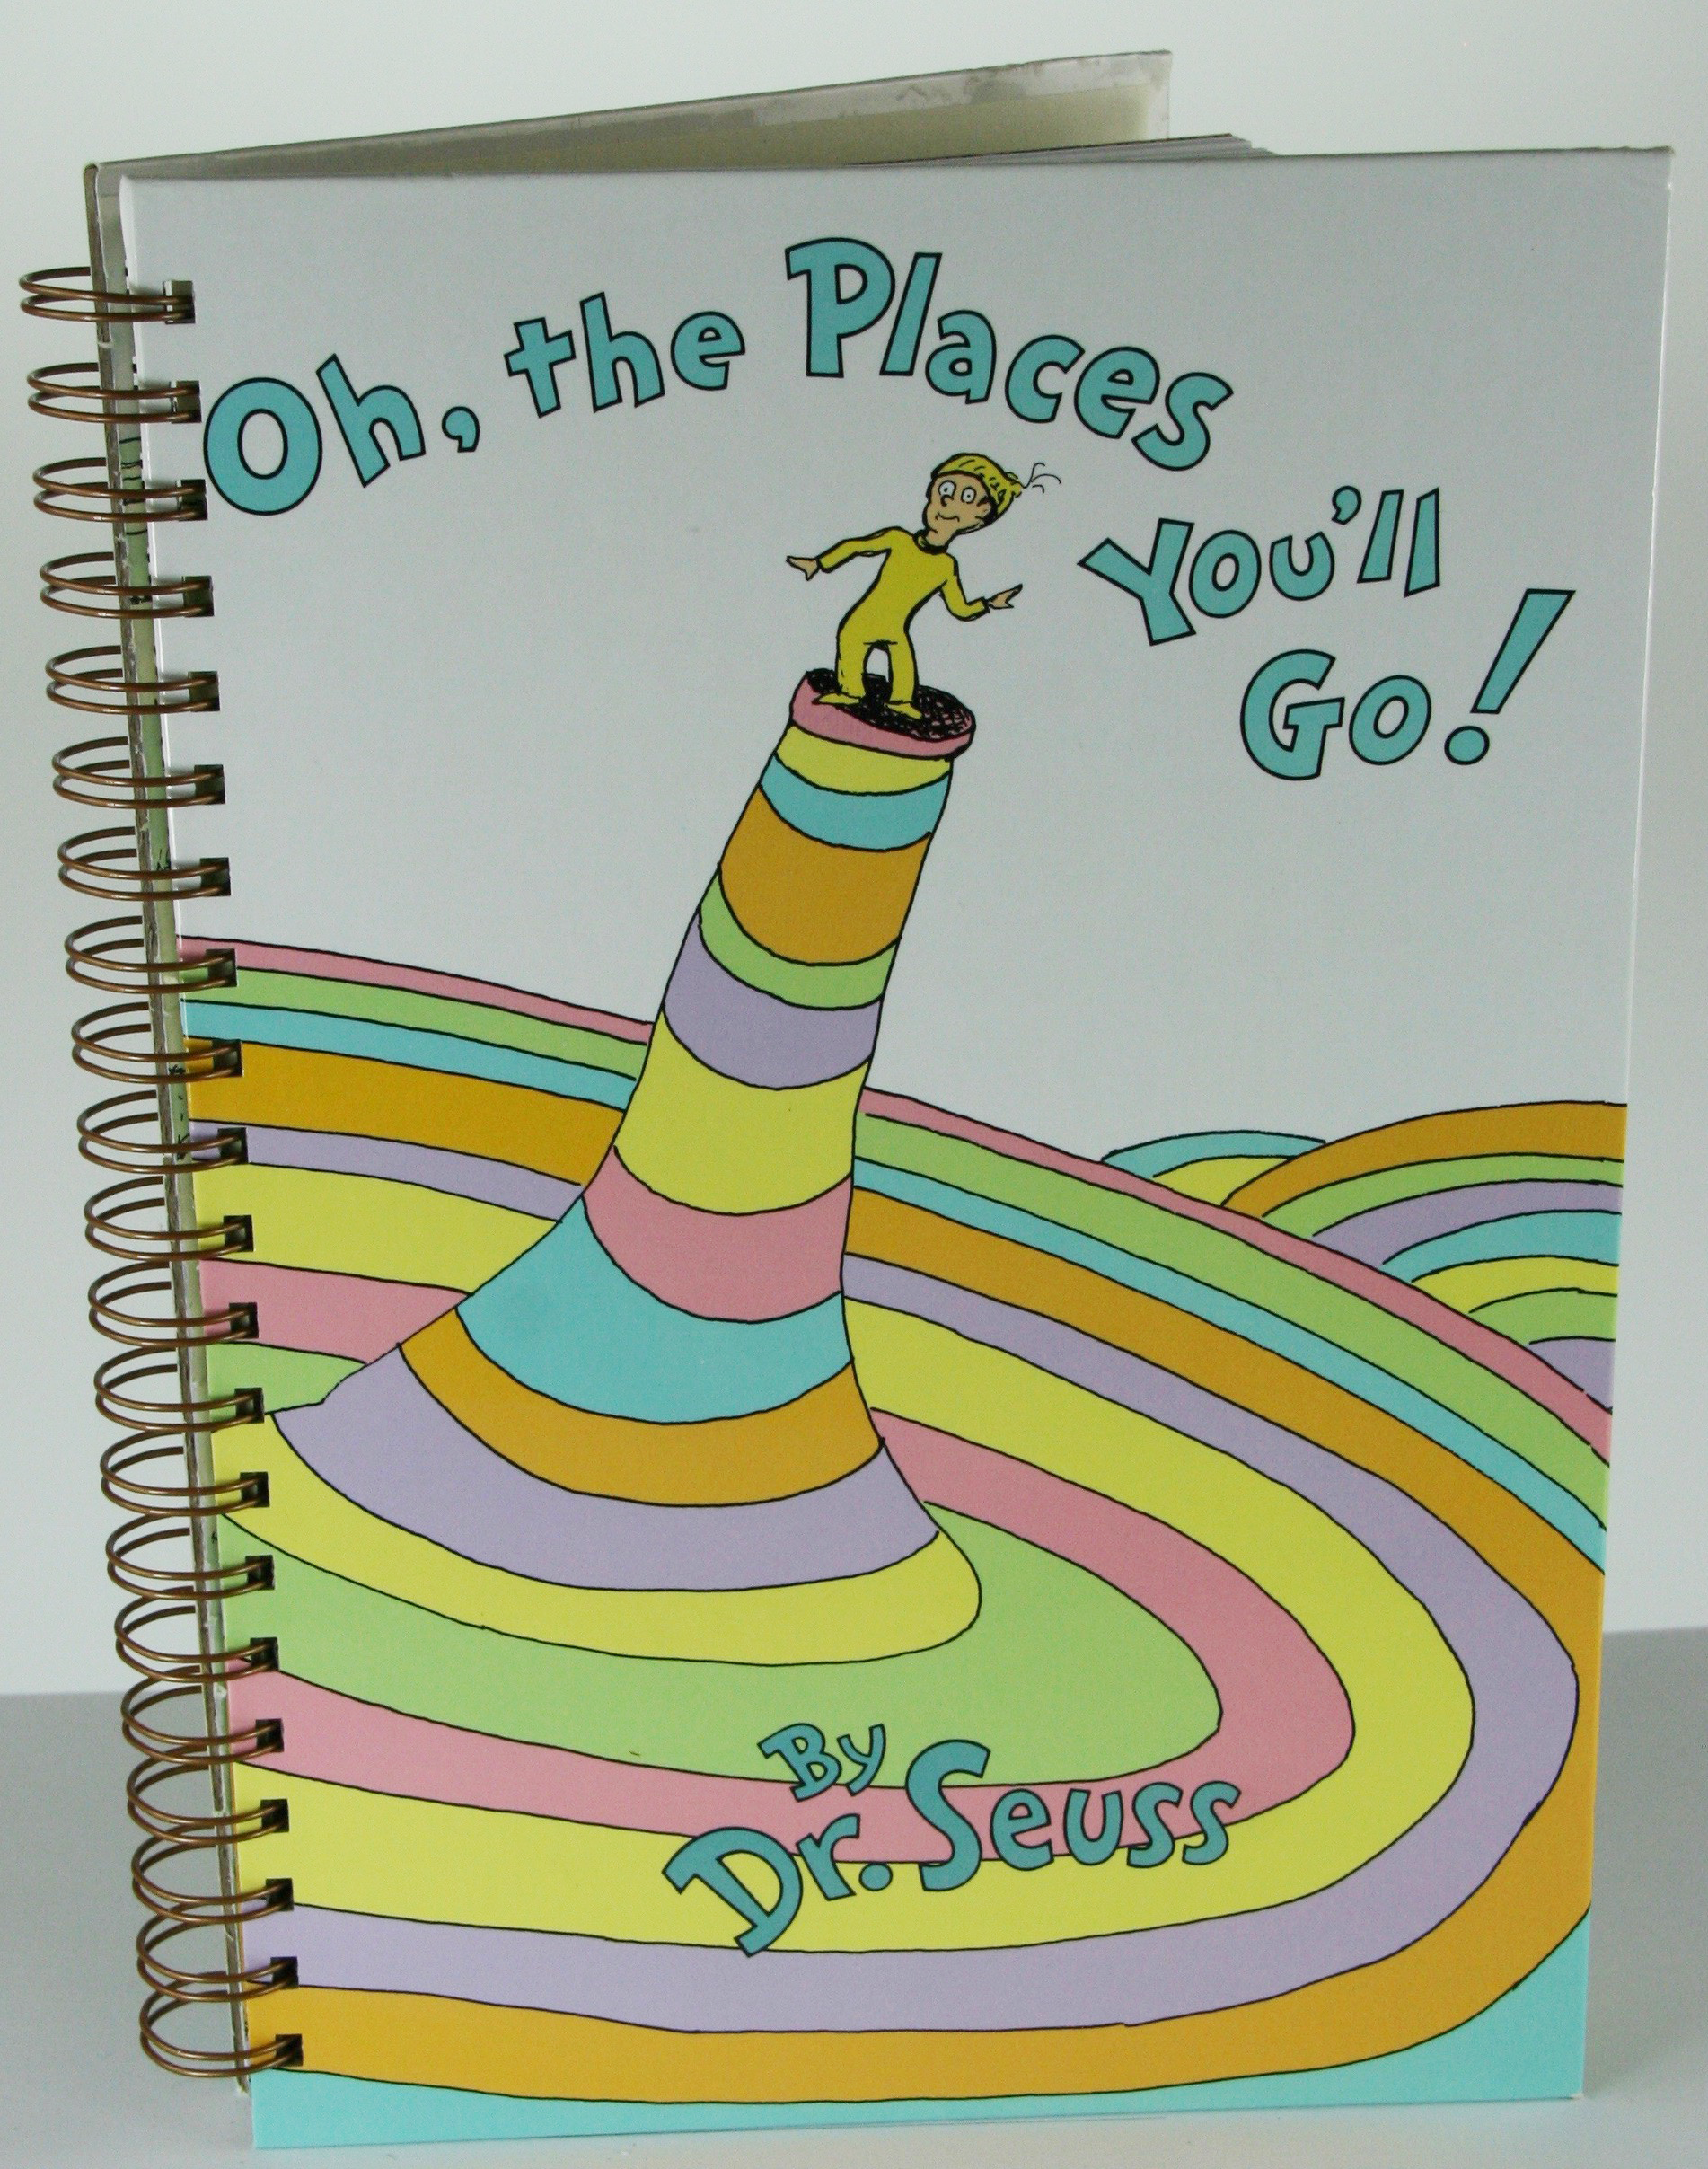 oh the places you'll go!